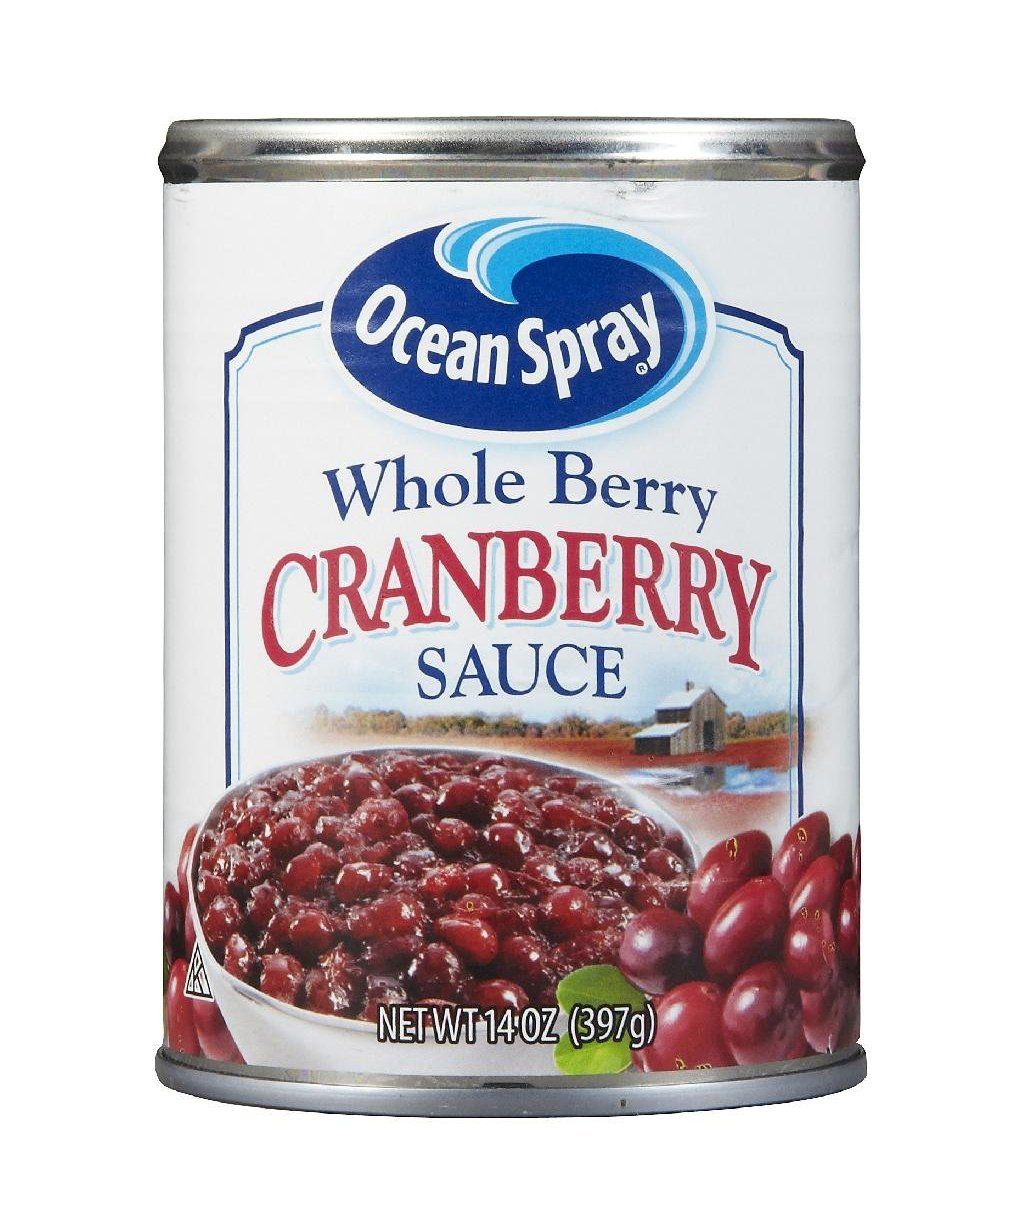 Ocean Spray Whole Berry Cranberry Sauce *** See this great product ...